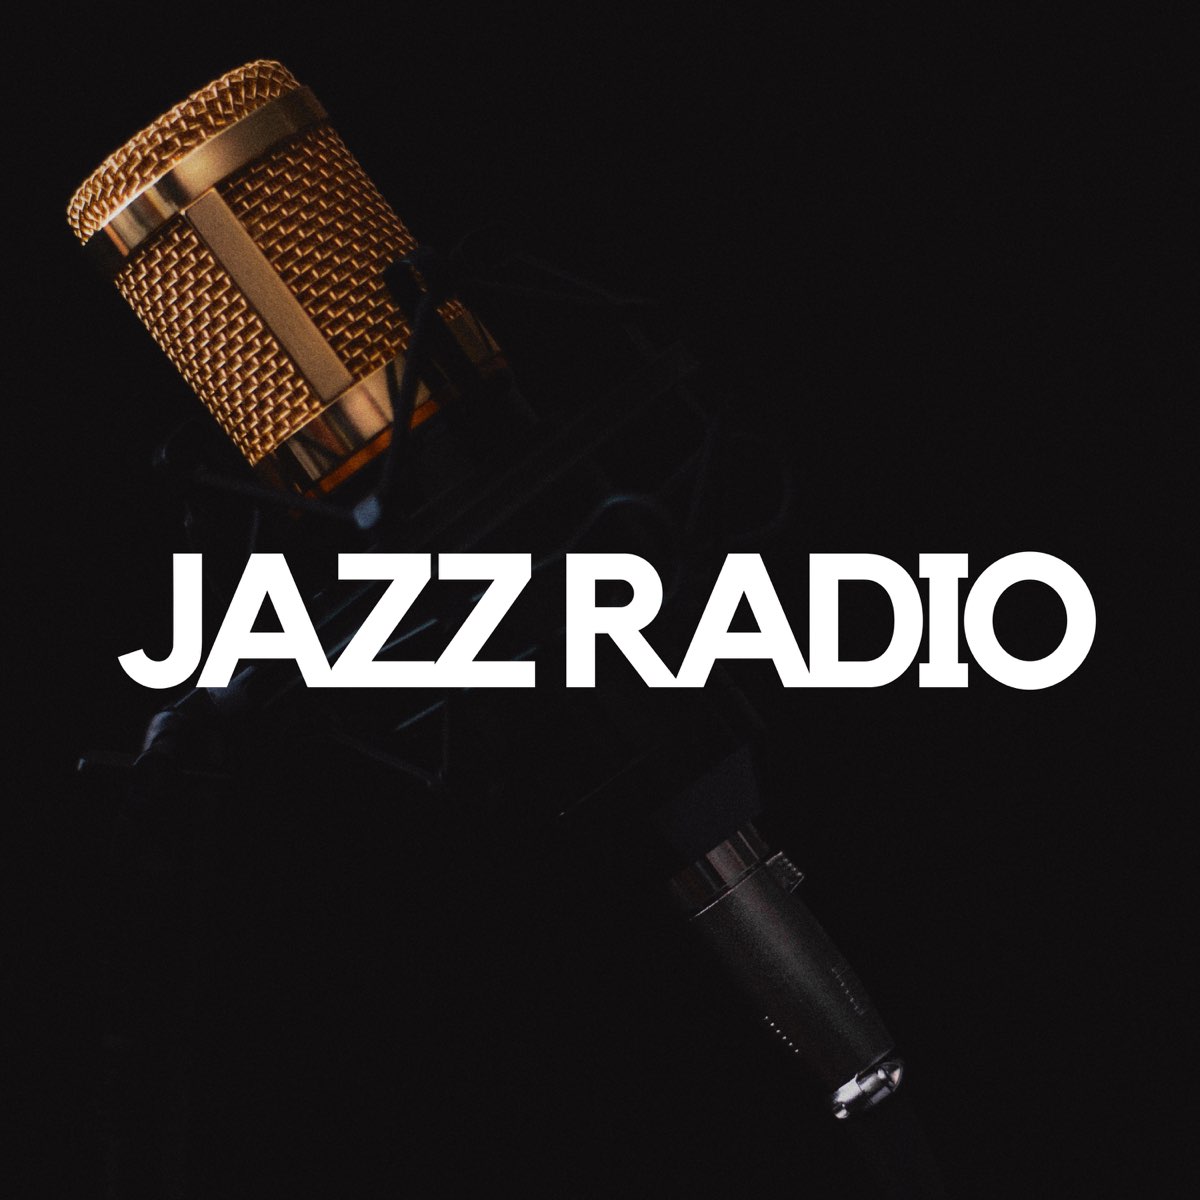 Jazz Radio - The Best Collection of Jazz Music Online, Smooth Jazz Songs,  Cool Jazz Collection par Relaxing Instrumental Jazz Academy sur Apple Music